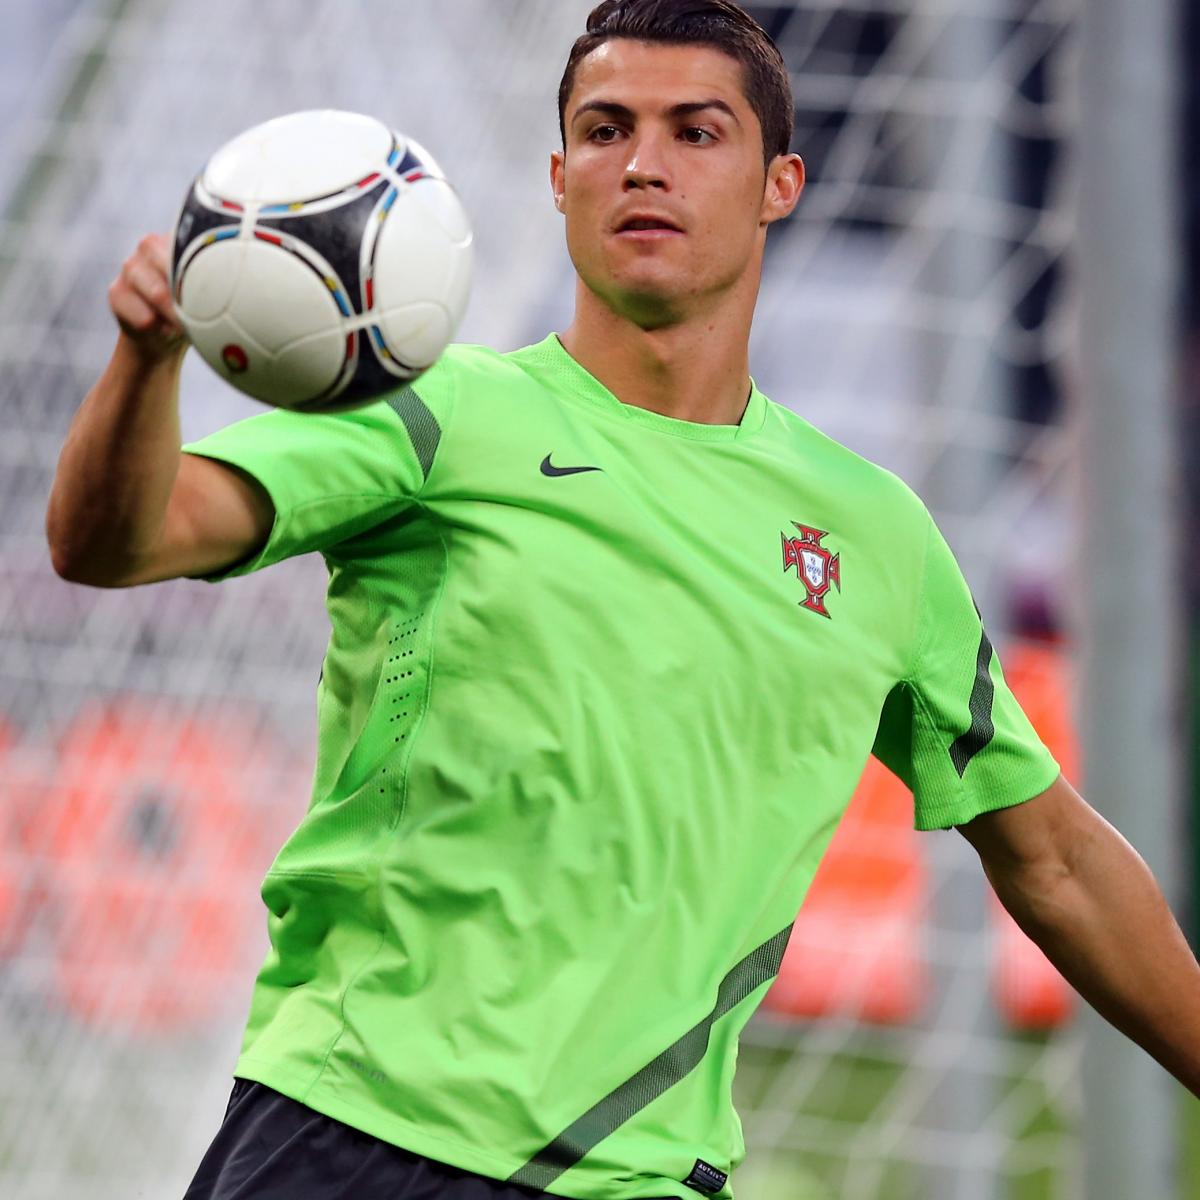 Portugal vs. Spain Start Time: Where and When to Watch the Battle of Real Stars - Bleacher Report